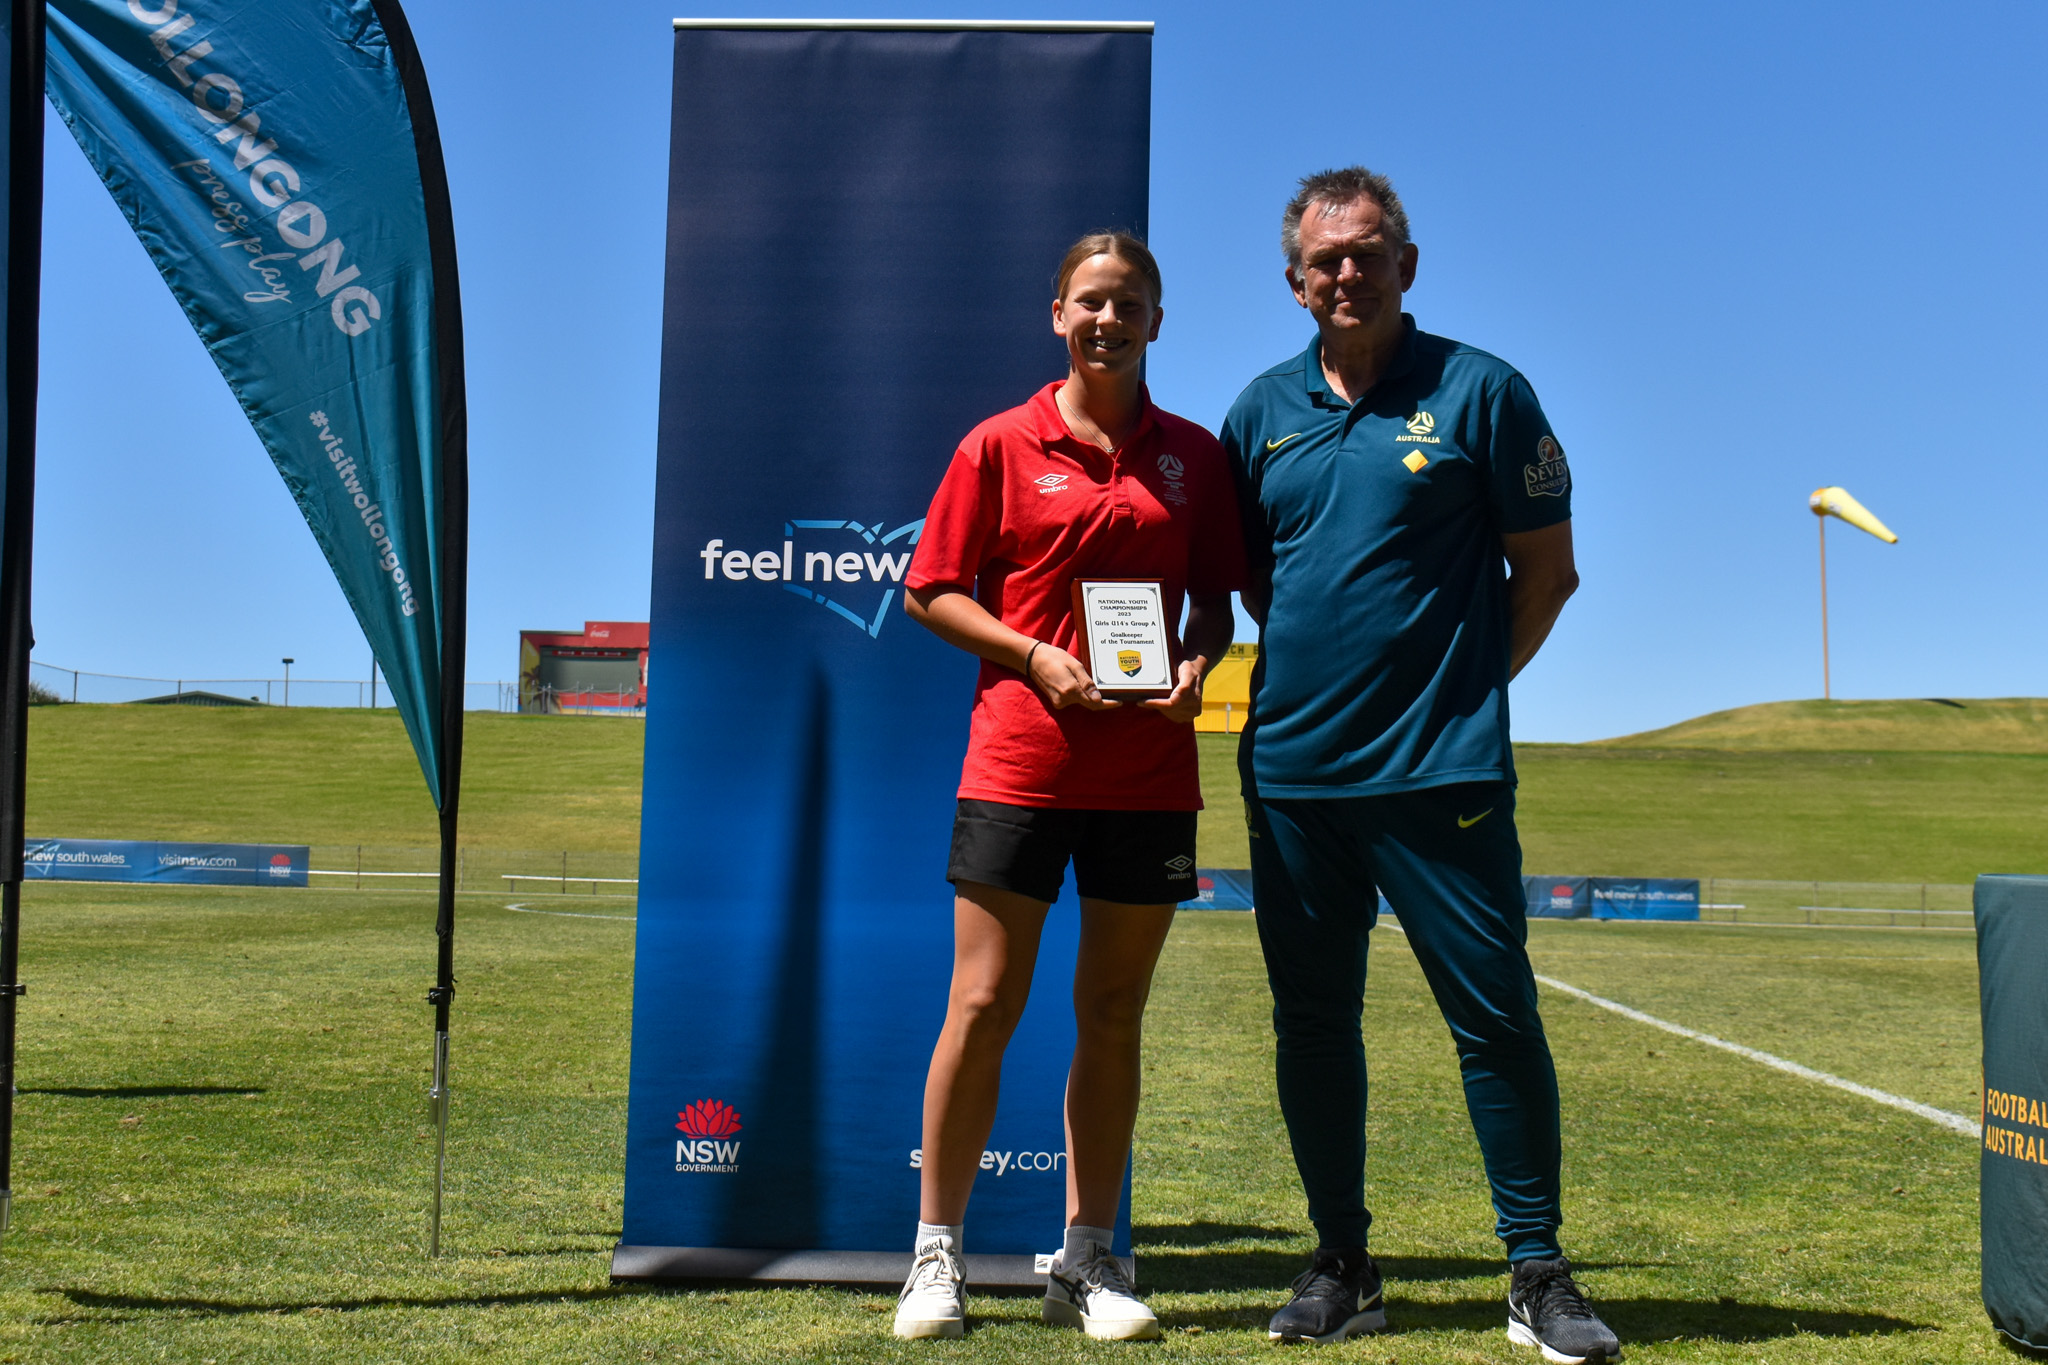 Caoimhe (Keeba) Bray from Football Northern NSW was awarded the Under 14A Goalkeeper of the Tournament by Franken.